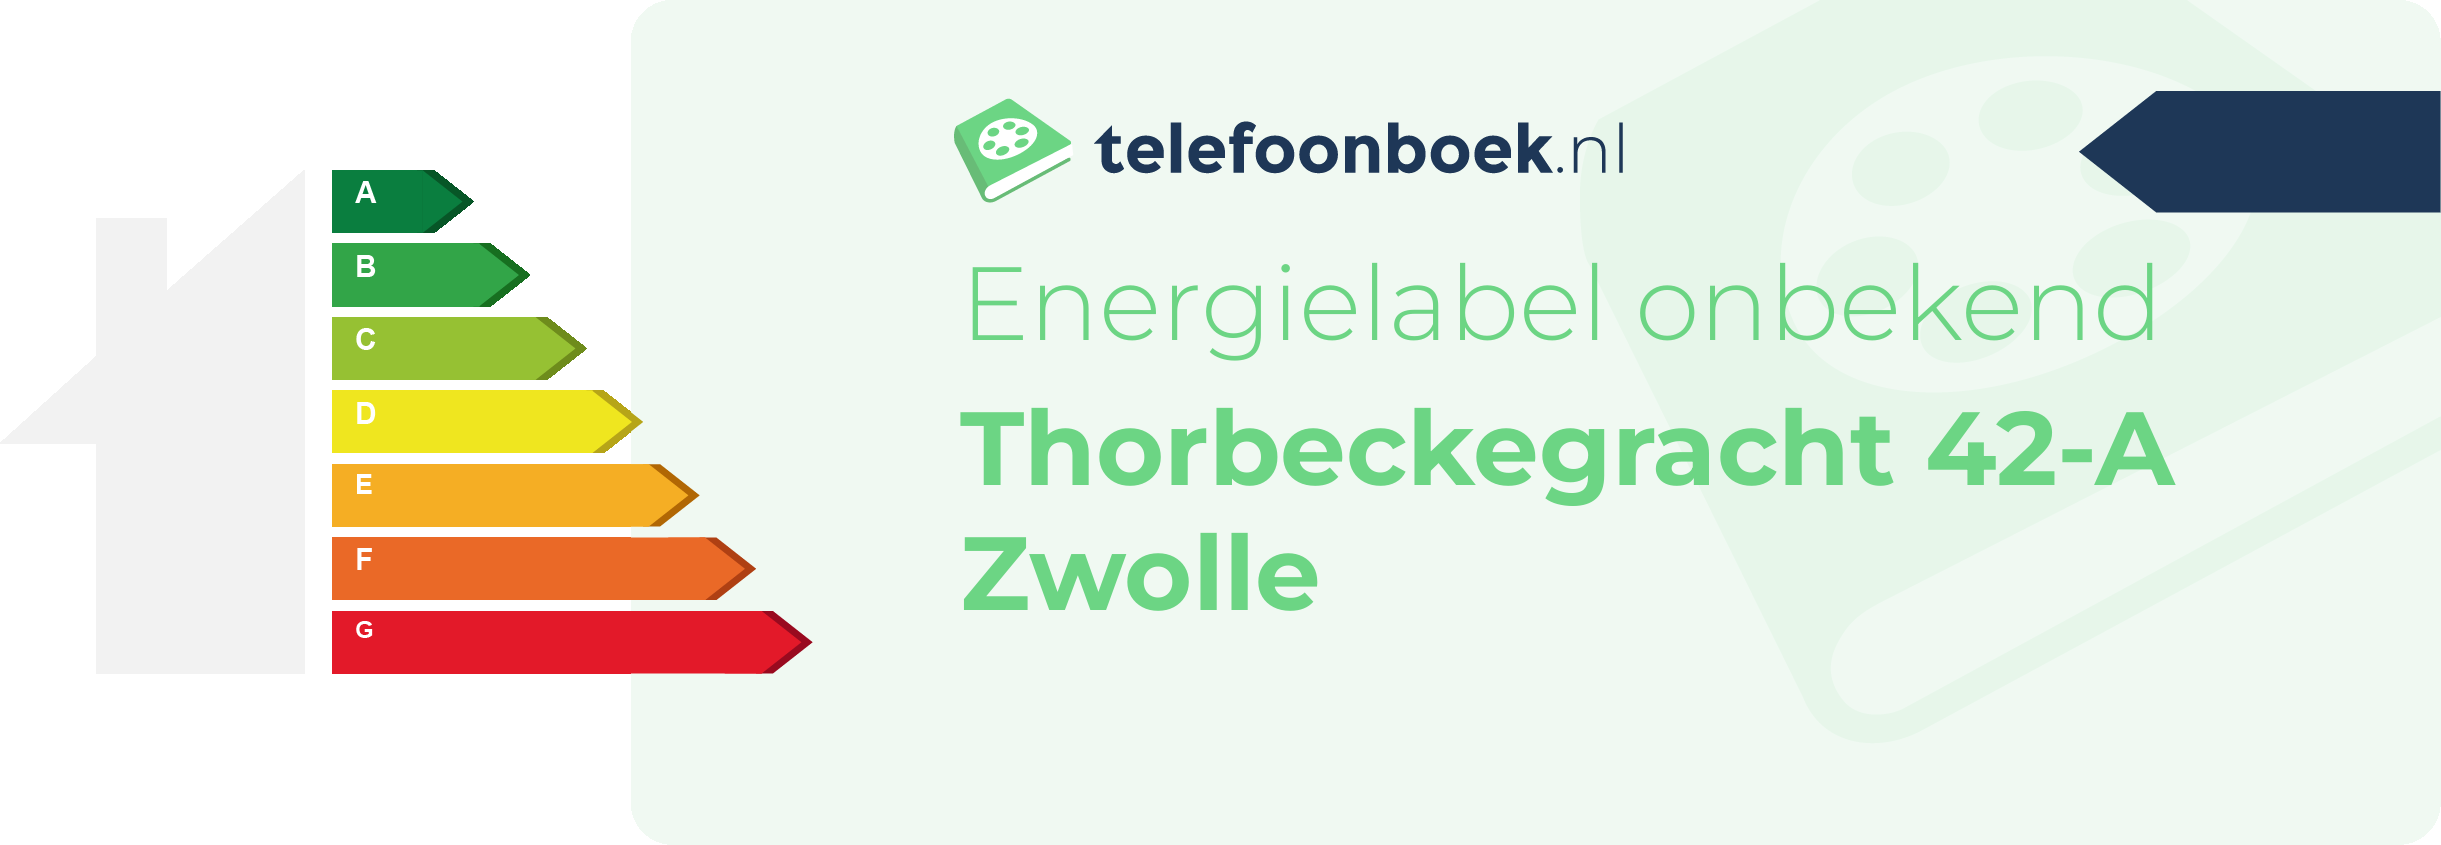 Energielabel Thorbeckegracht 42-A Zwolle